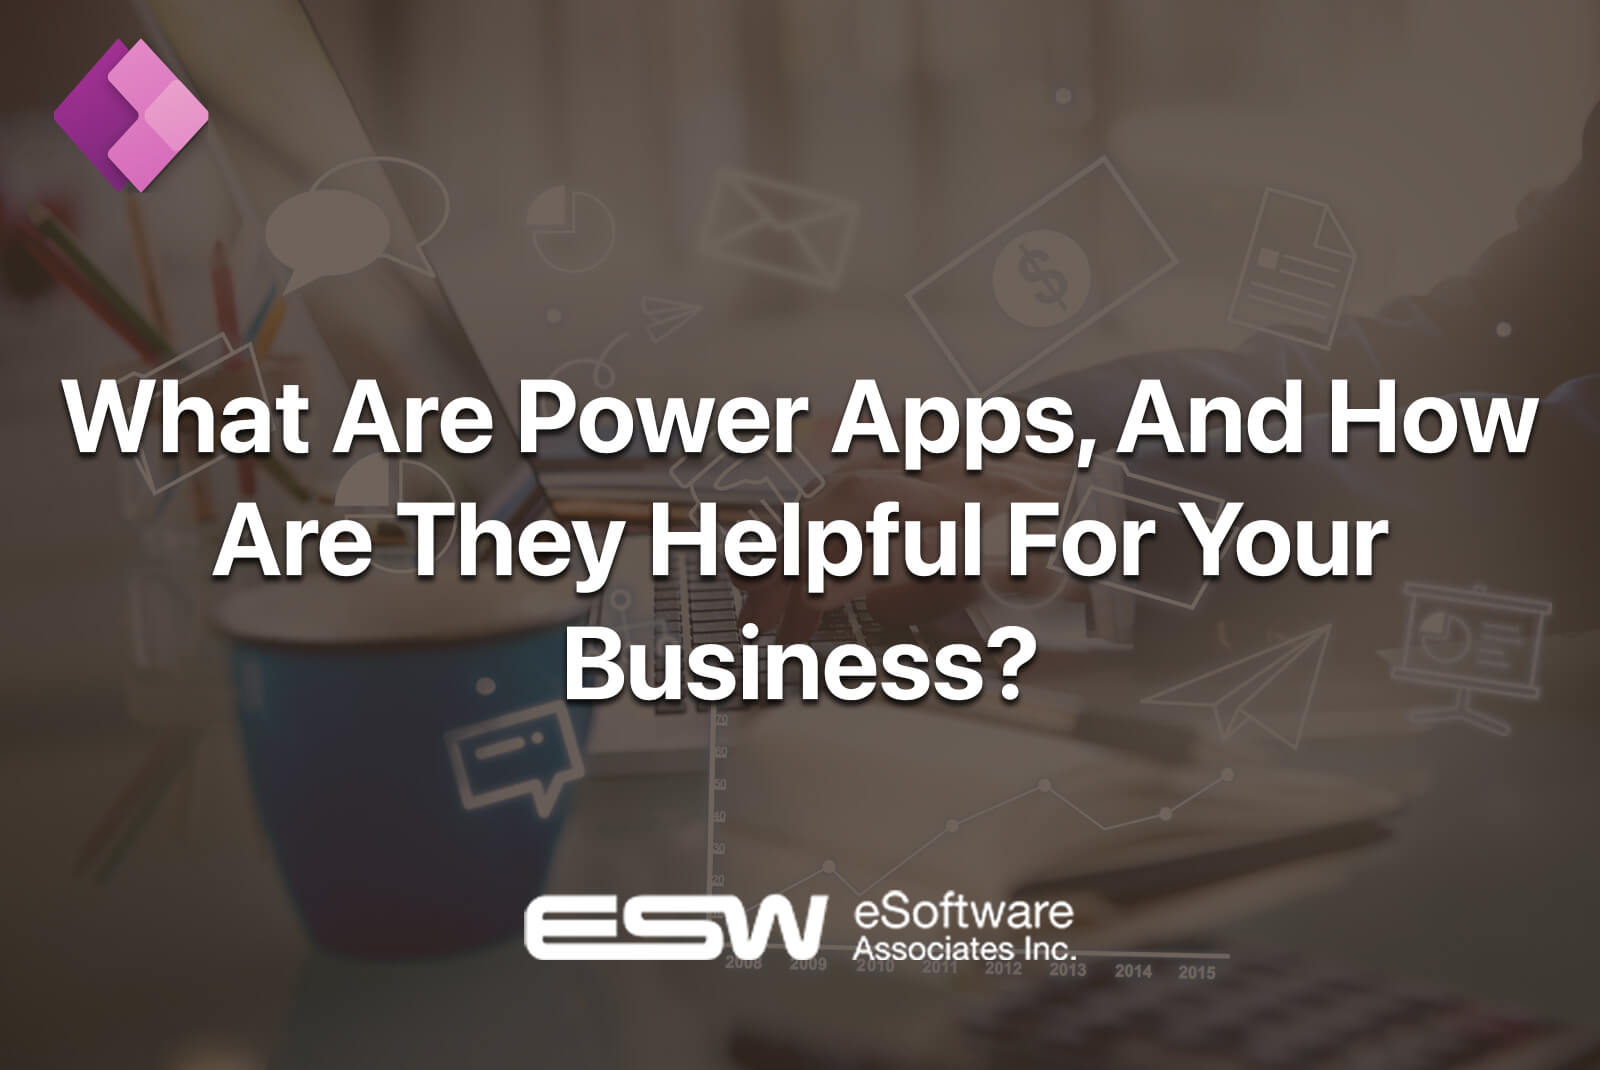 How PowerApps are useful for your business?